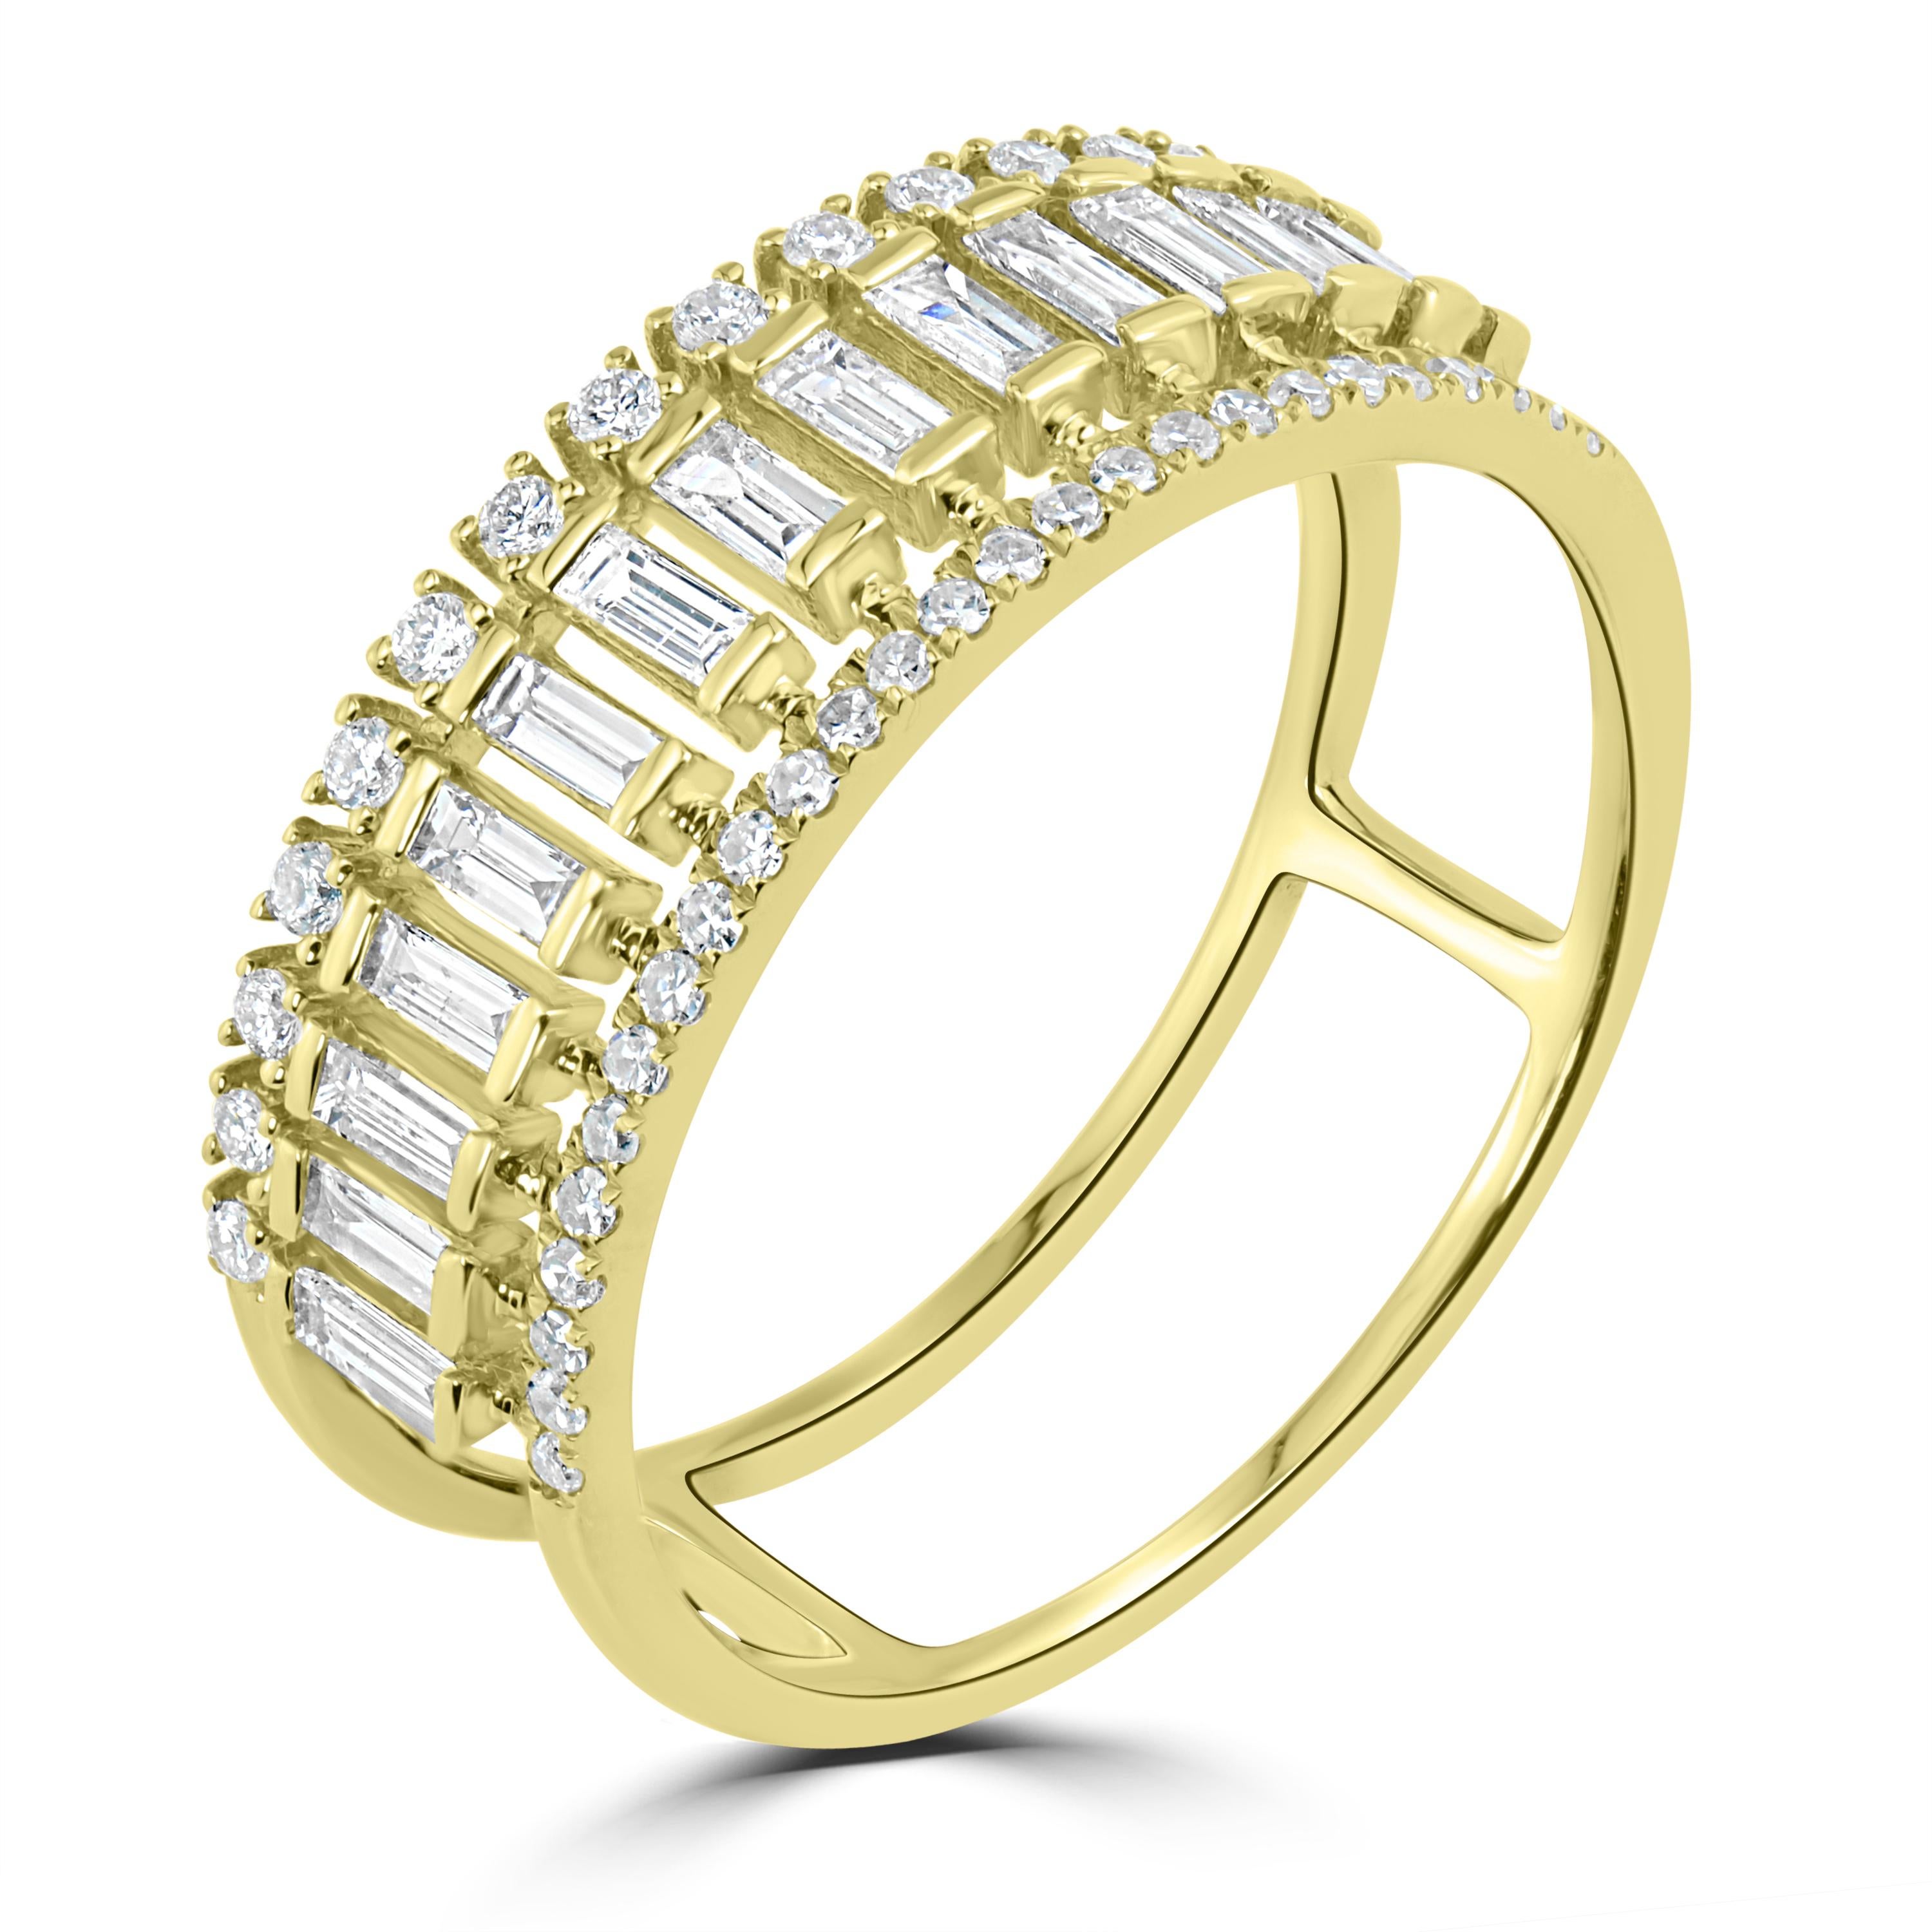 Rows of extravagant shimmer and style. This Luxle Baguette and Round Diamond Band Ring crafted in 18K yellow gold for women sparkles with 15 baguette diamonds and 41 round diamonds totaling 0.49 Cts. This yellow gold ring is showcased with